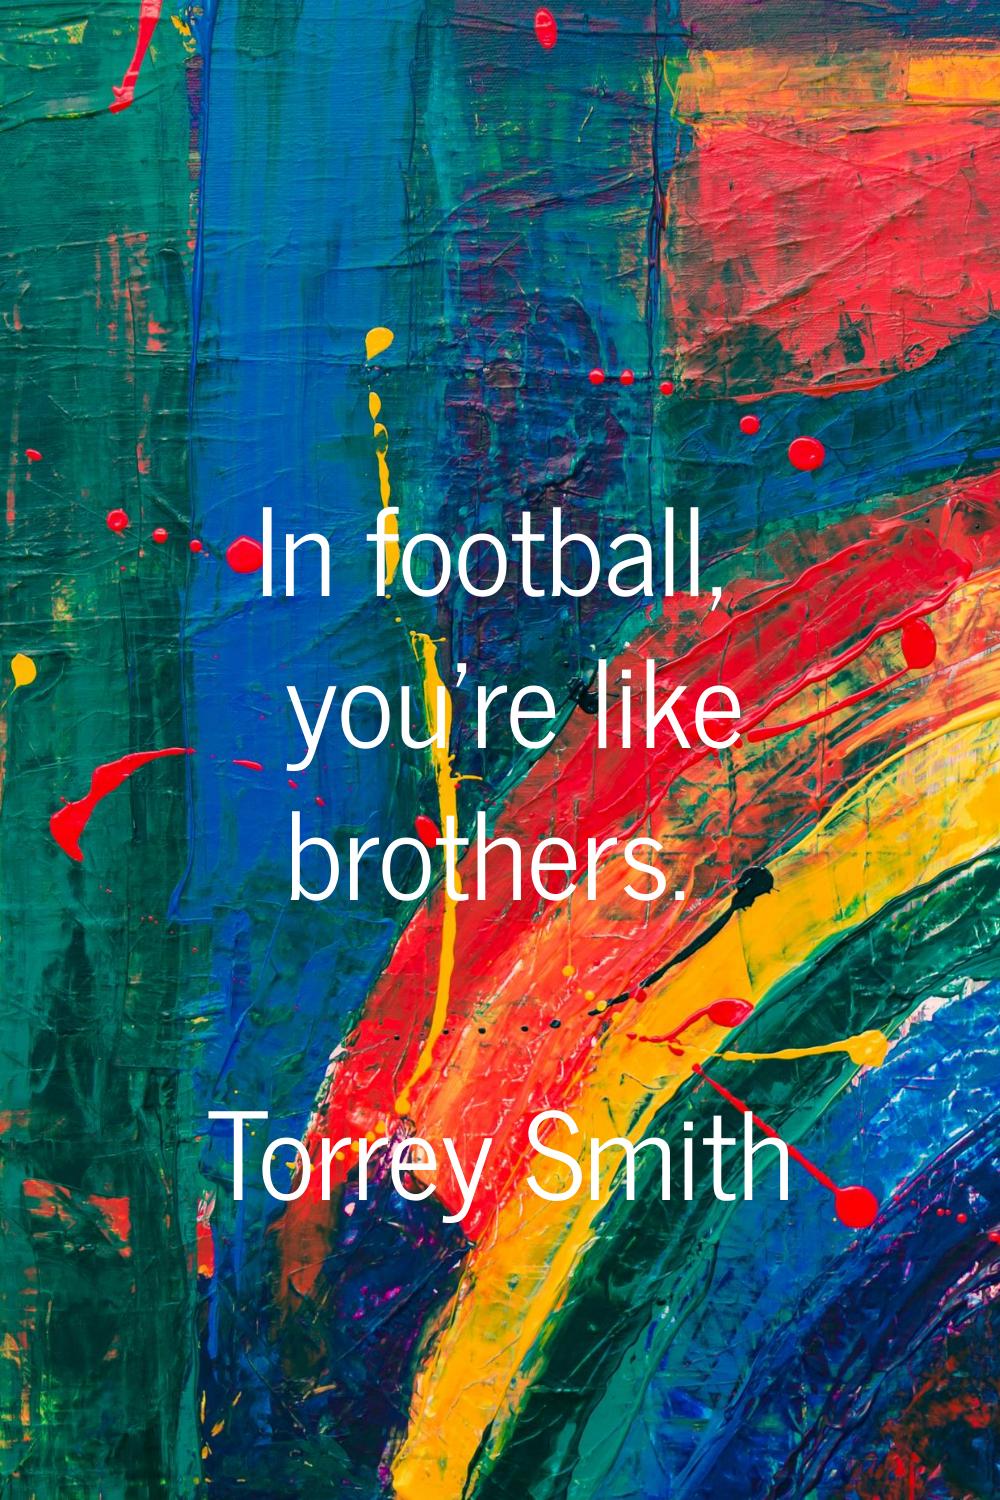 In football, you're like brothers.